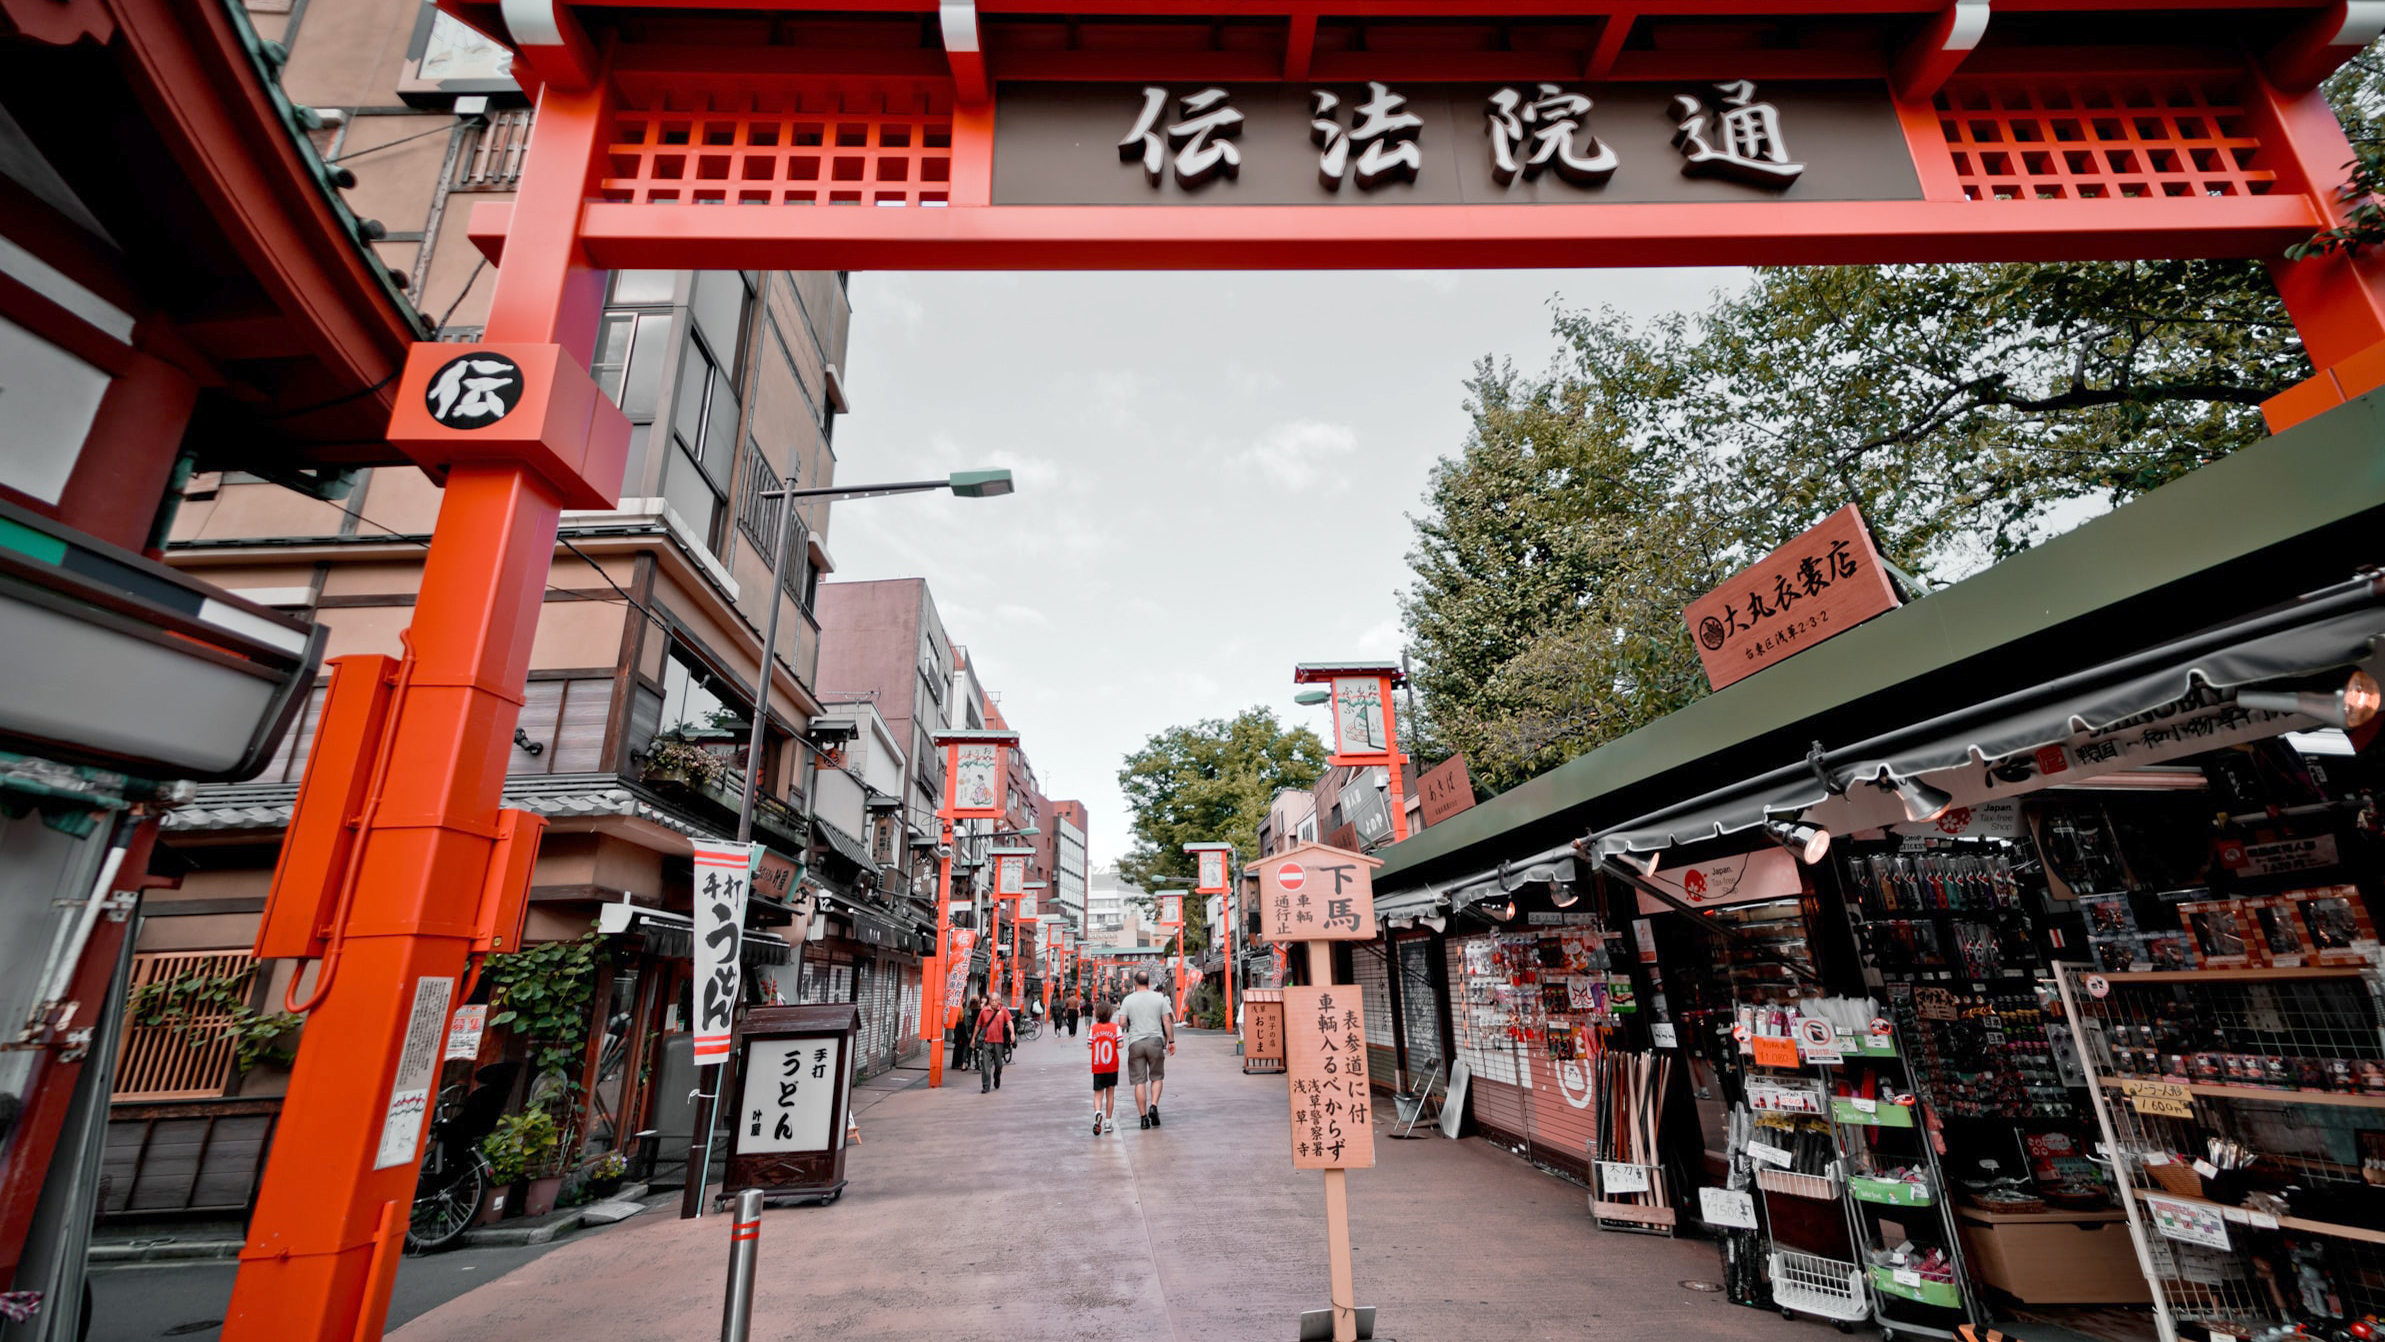 This traditional shopping street near Sensoji in Asakusa is at risk of disappearing